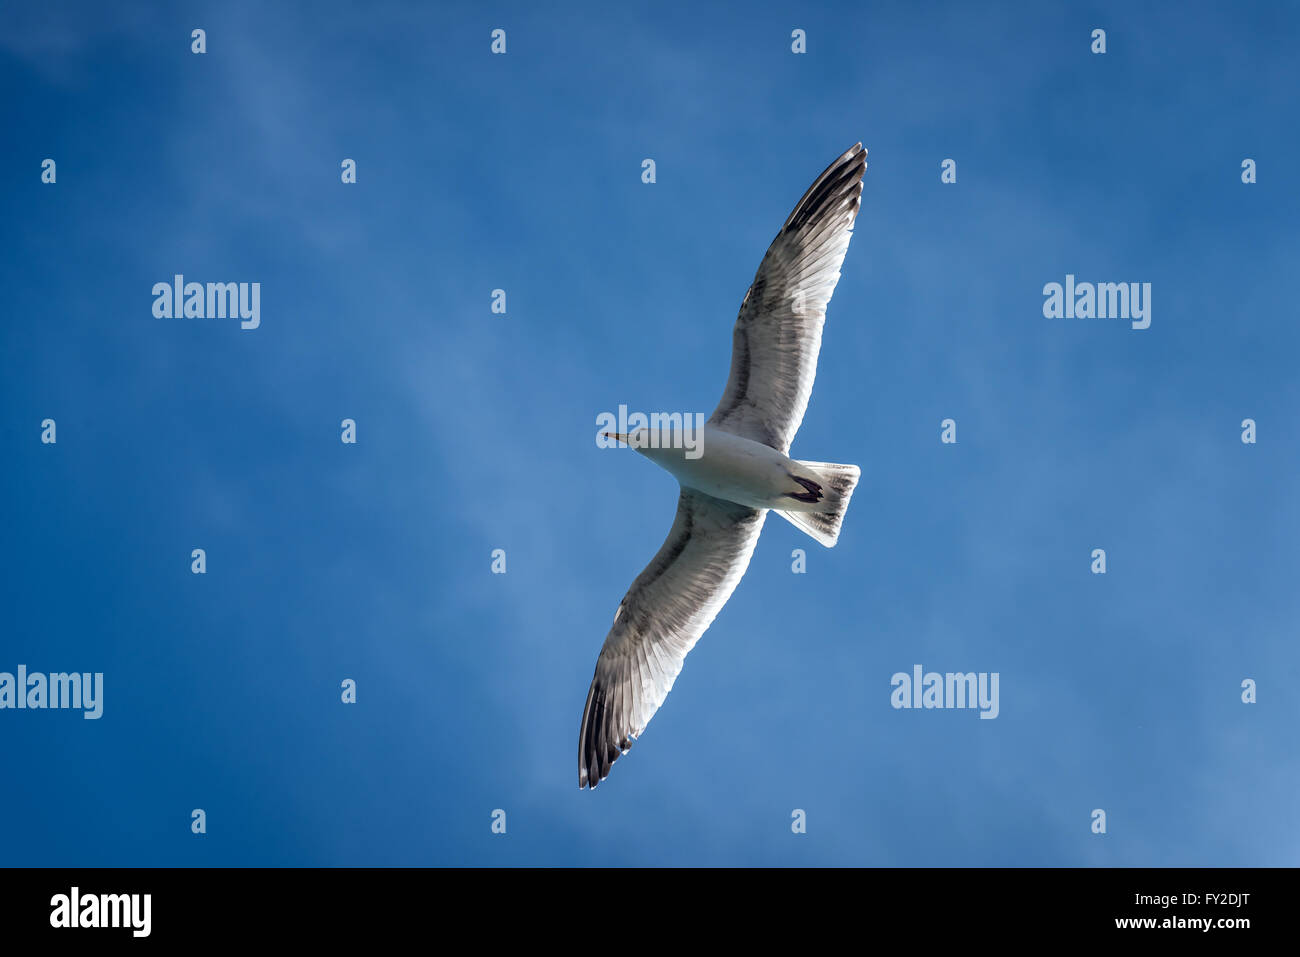 A young seagull flying against a blue sky. Stock Photo